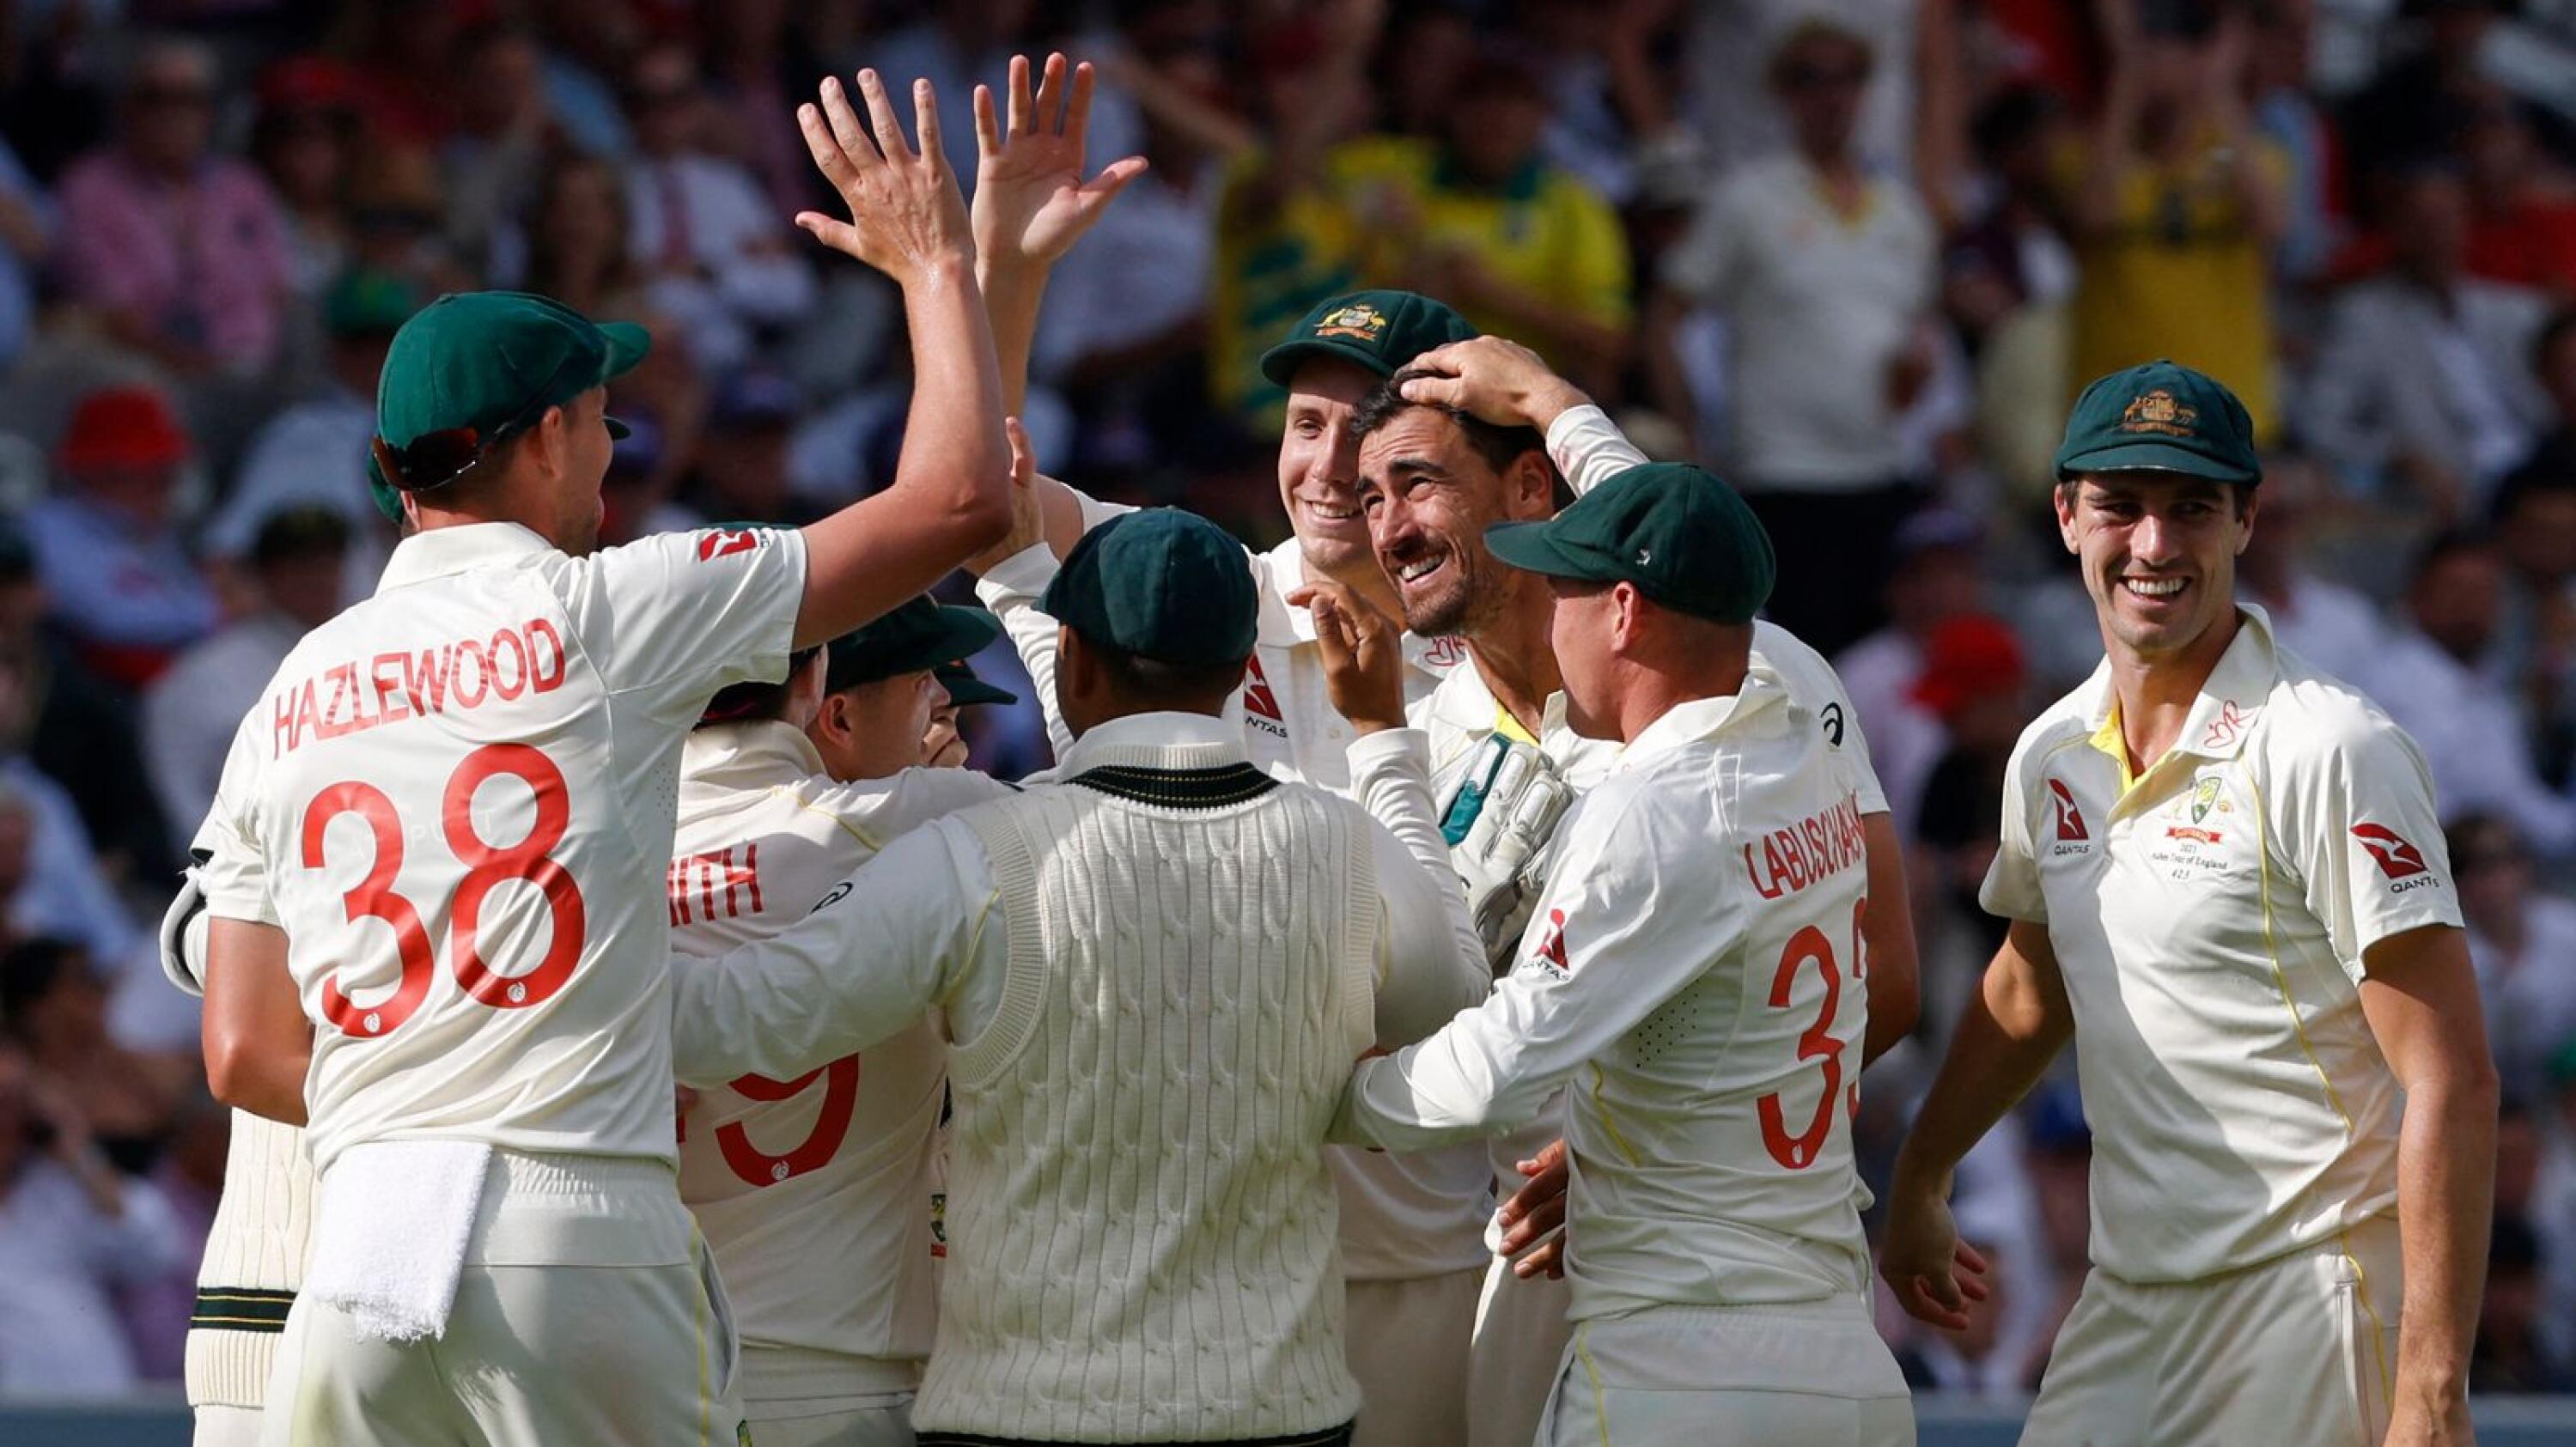 Australia's Mitchell Starc celebrates with teammates after taking the wicket of England's Joe Root on day two of the second Ashes cricket Test match at Lord's cricket ground in London on Thursday